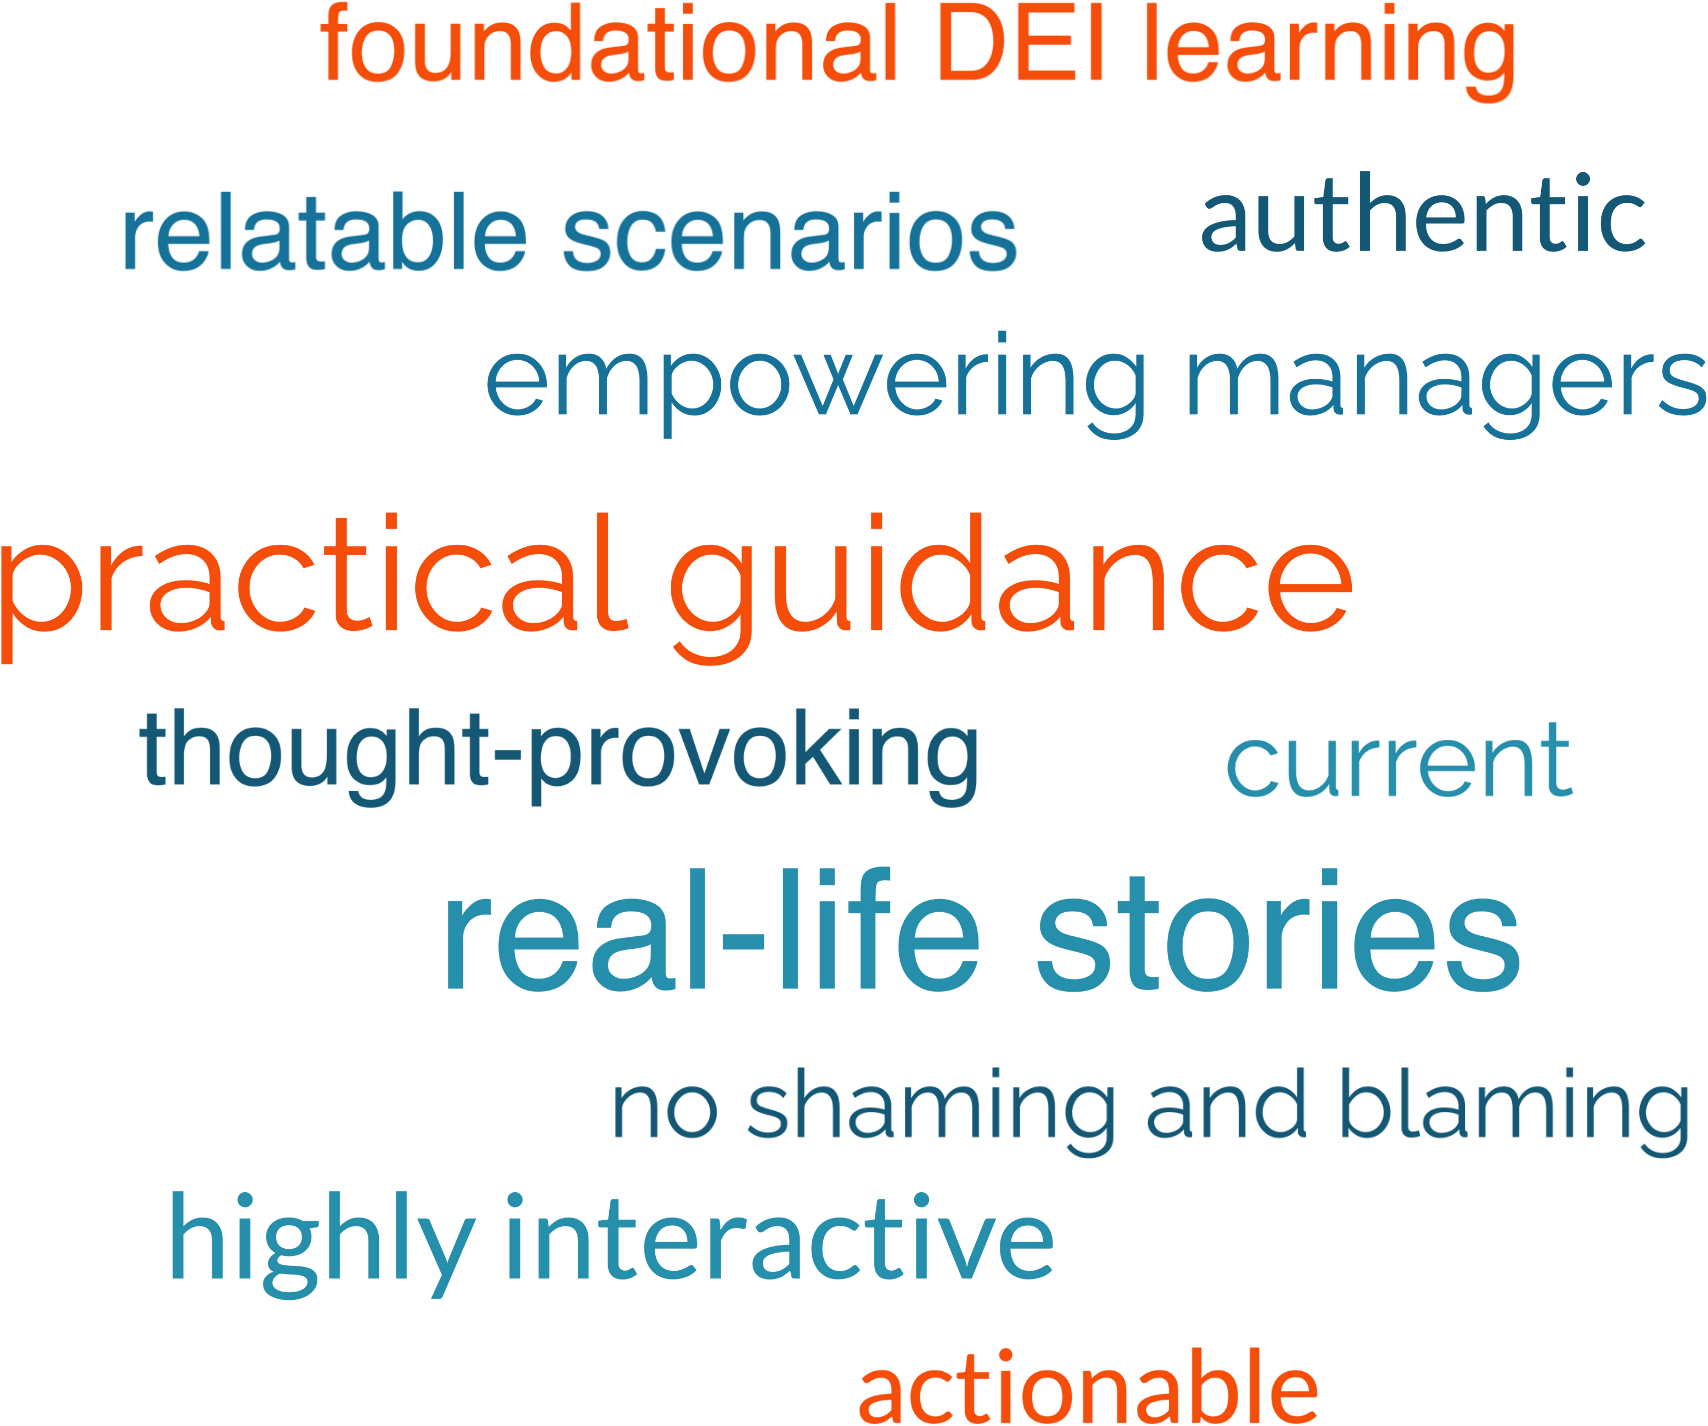 DEI Overview Image